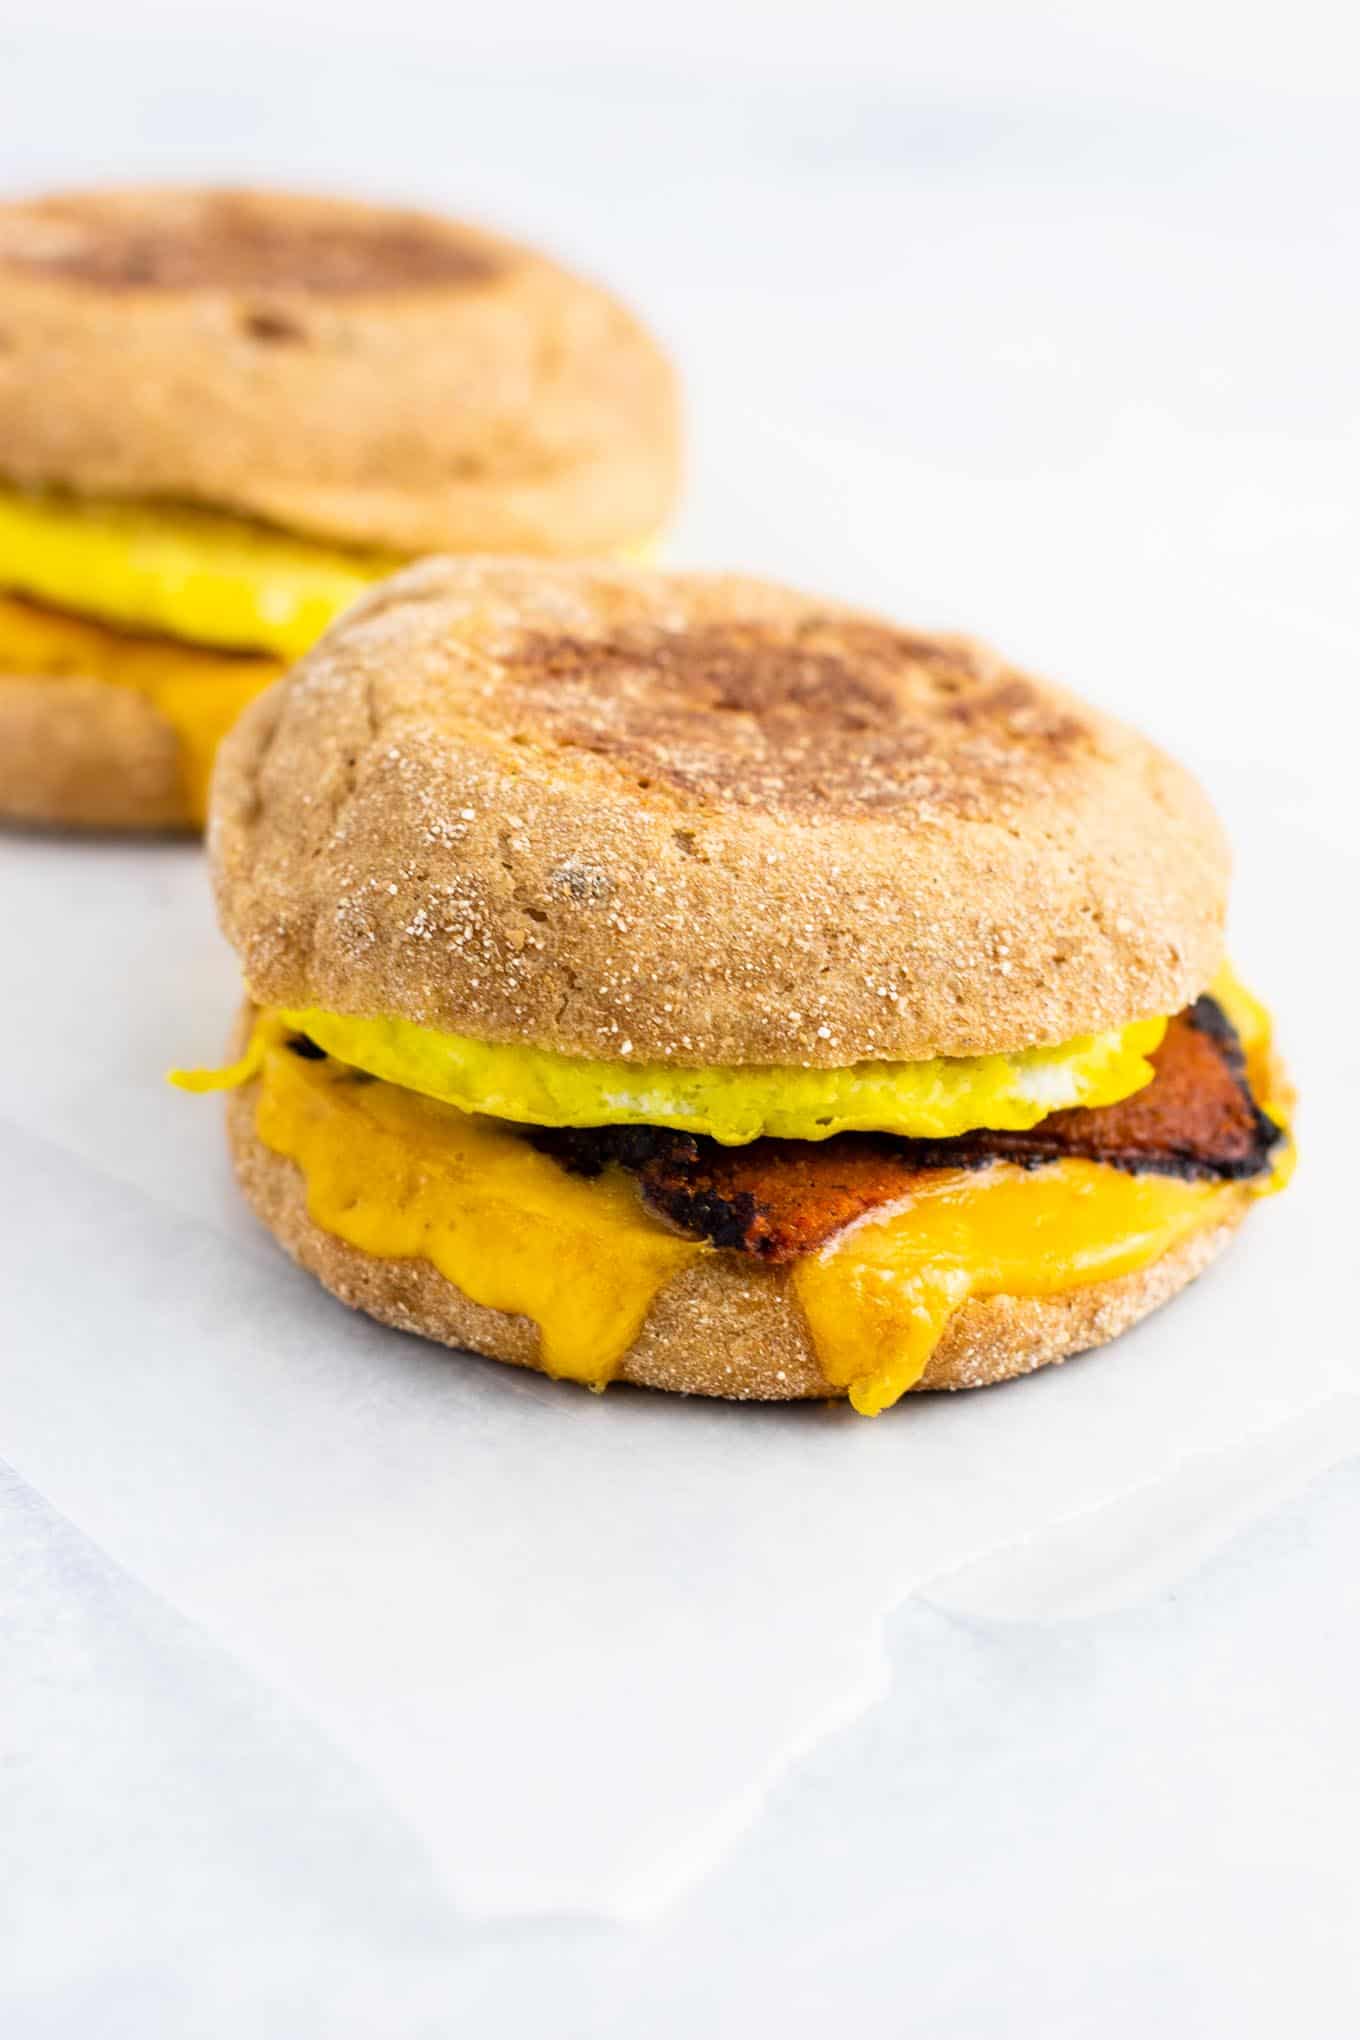 Vegetarian meal prep ideas – these easy English muffin breakfast sandwiches taste amazing and are so easy to make! #vegetarian #breakfast #mealprep #englishmuffin #breakfastsandwich 